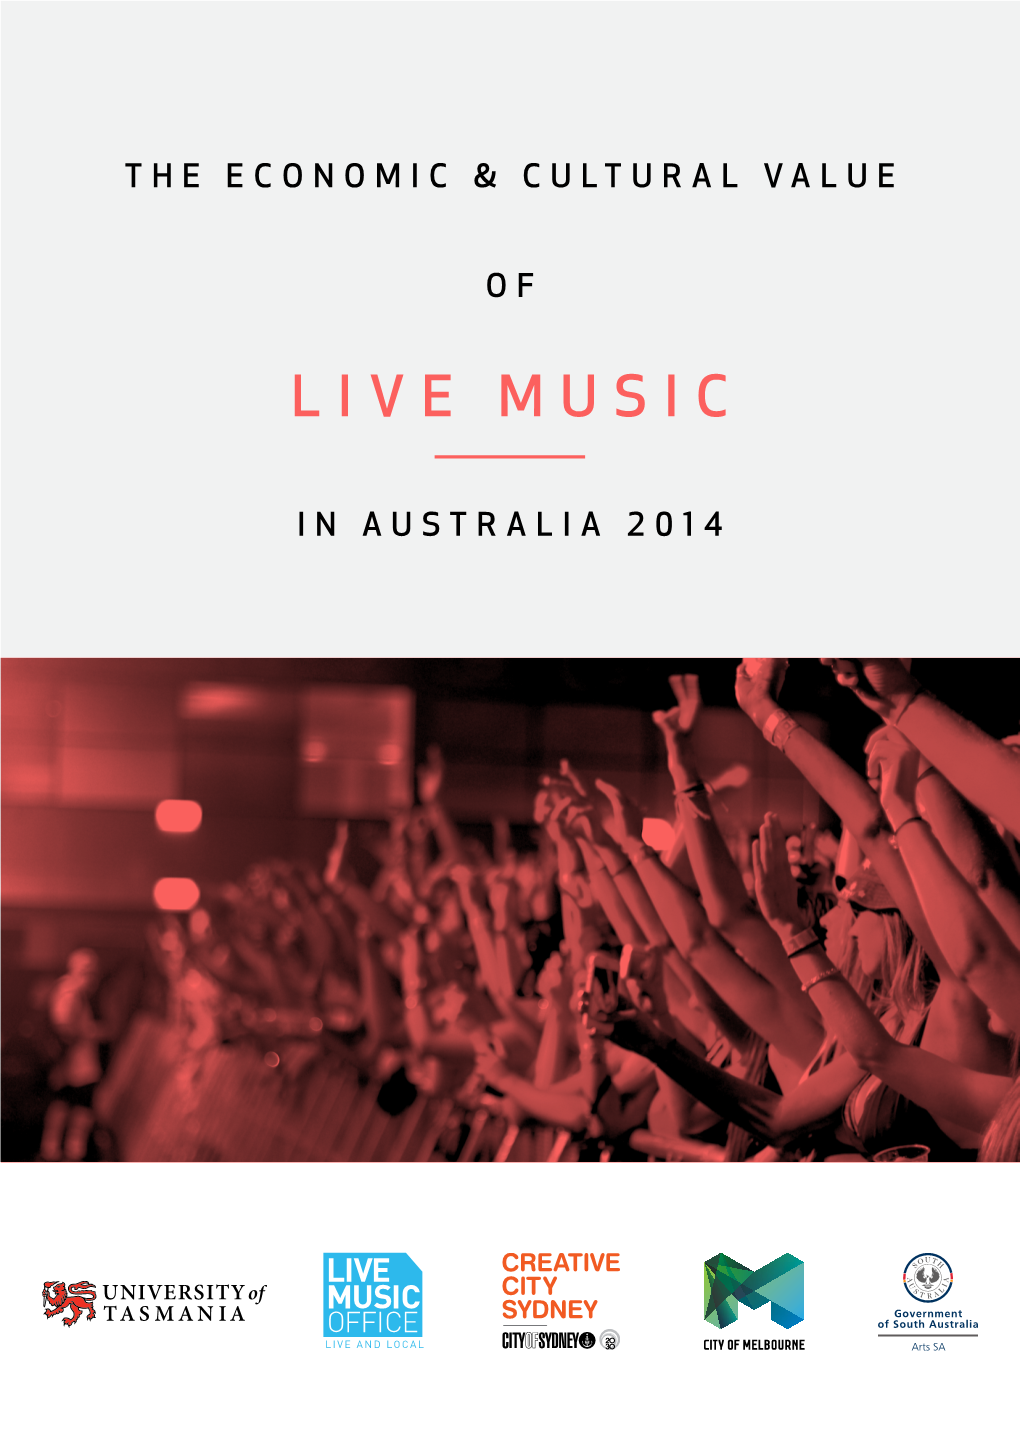 The Economic and Cultural Value of Live Music 2014